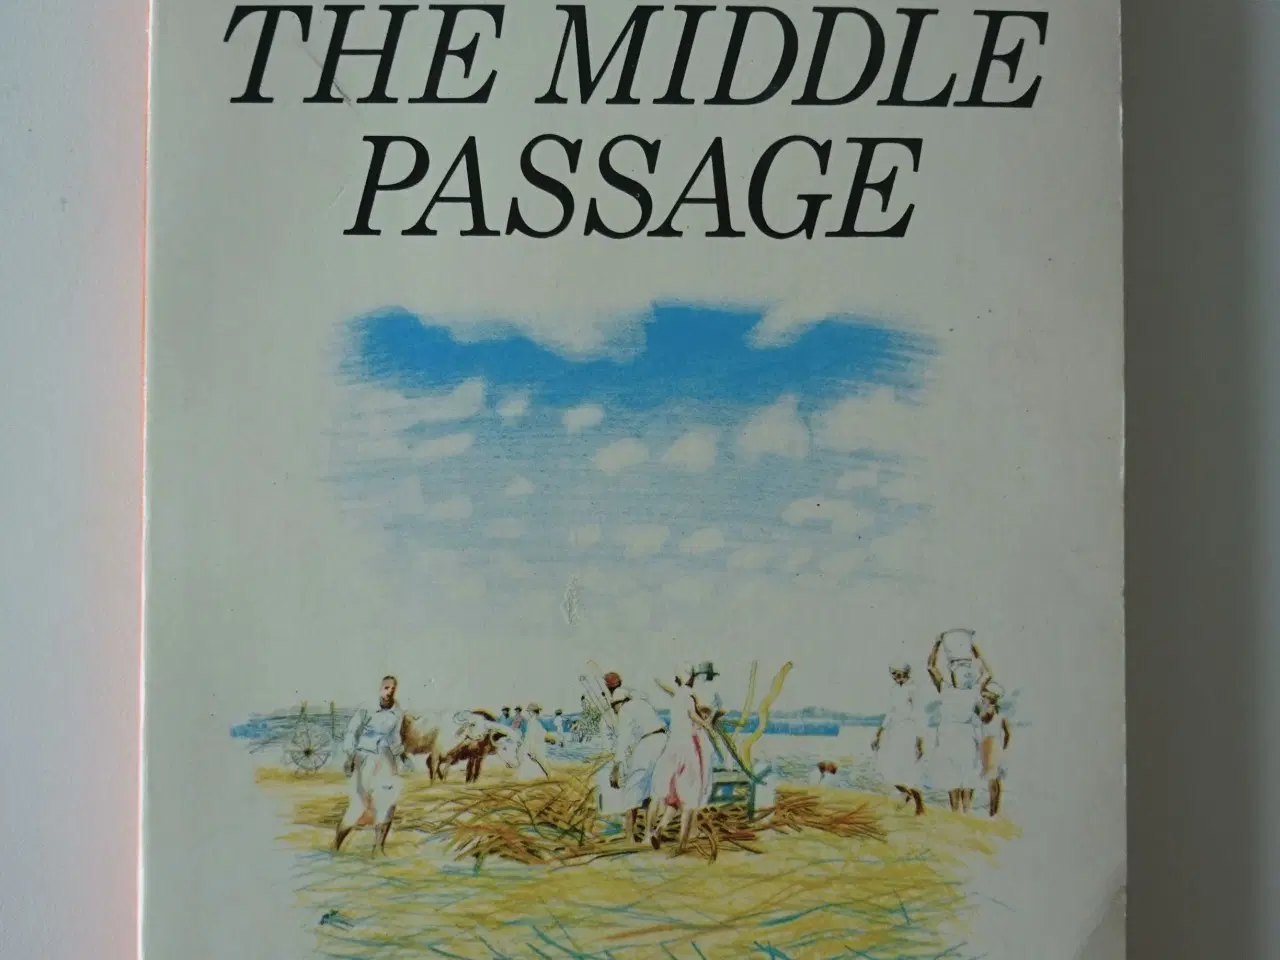 Billede 1 - The Middle Passage. V. S. Naipaul